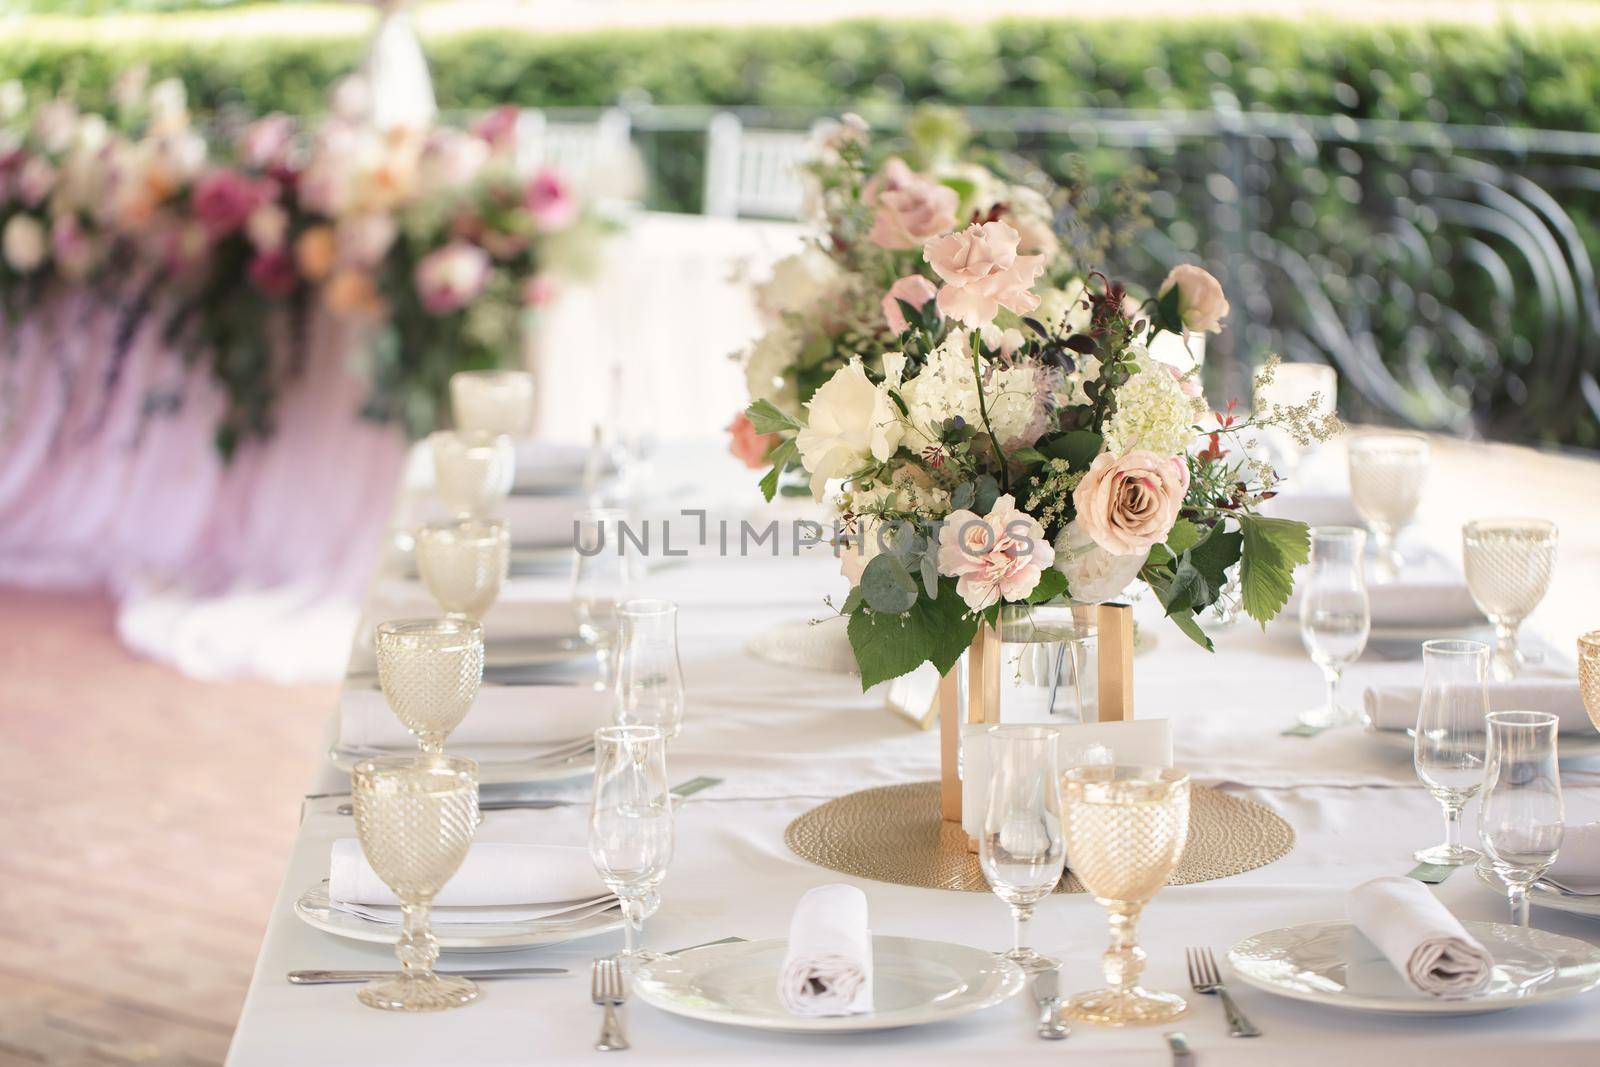 Luxurious setting of the wedding banquet table by StudioPeace